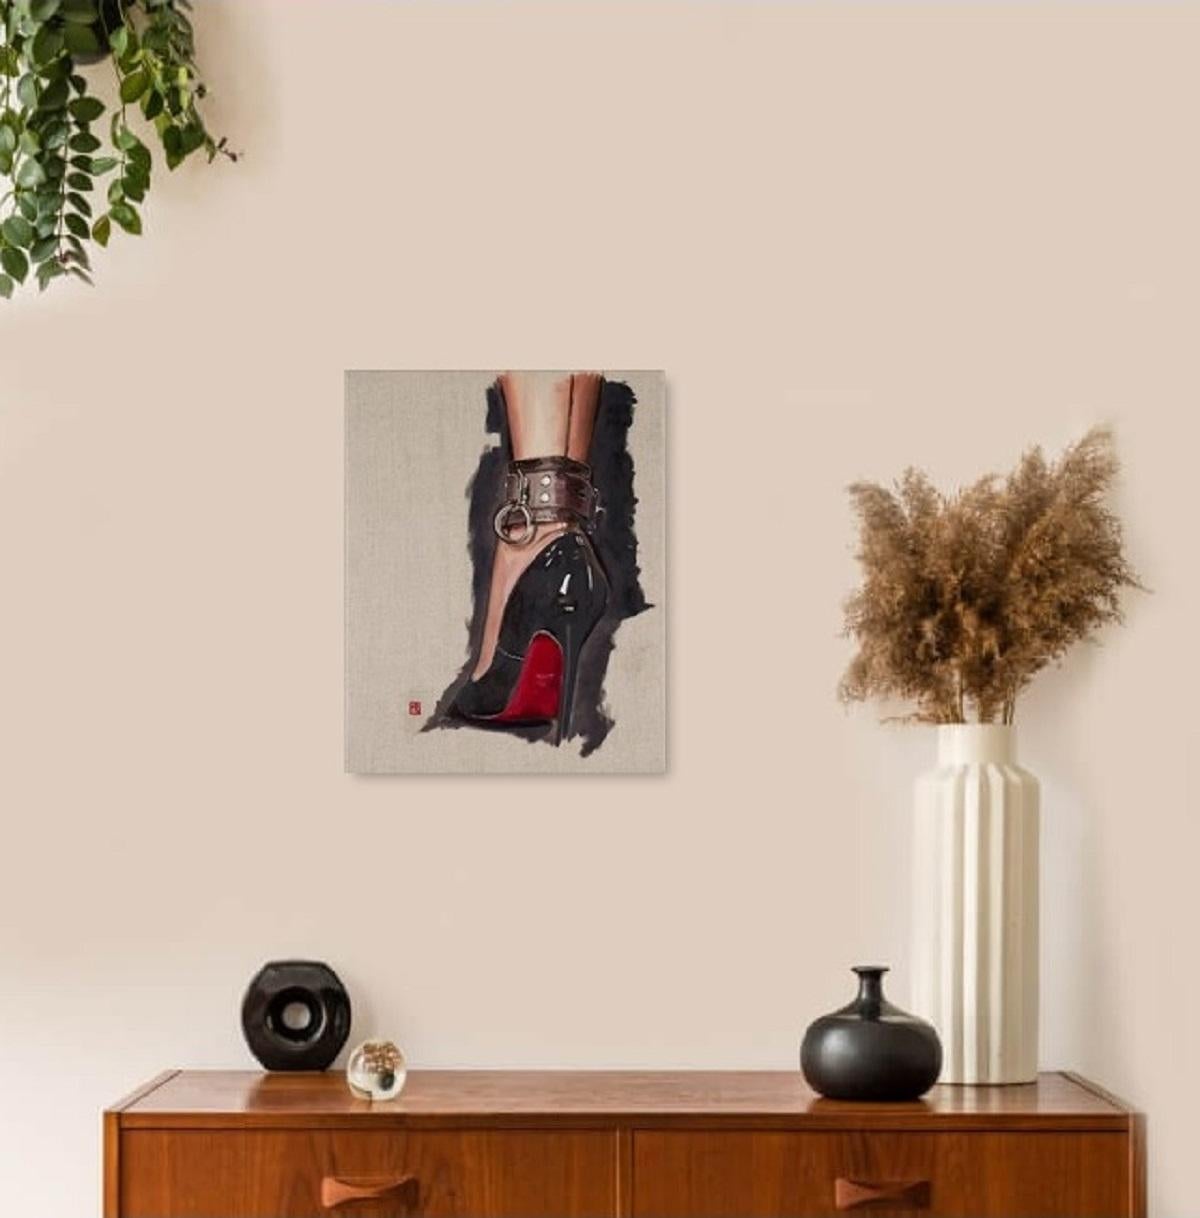 In These Shoes - Photorealist Painting by Martin Allen